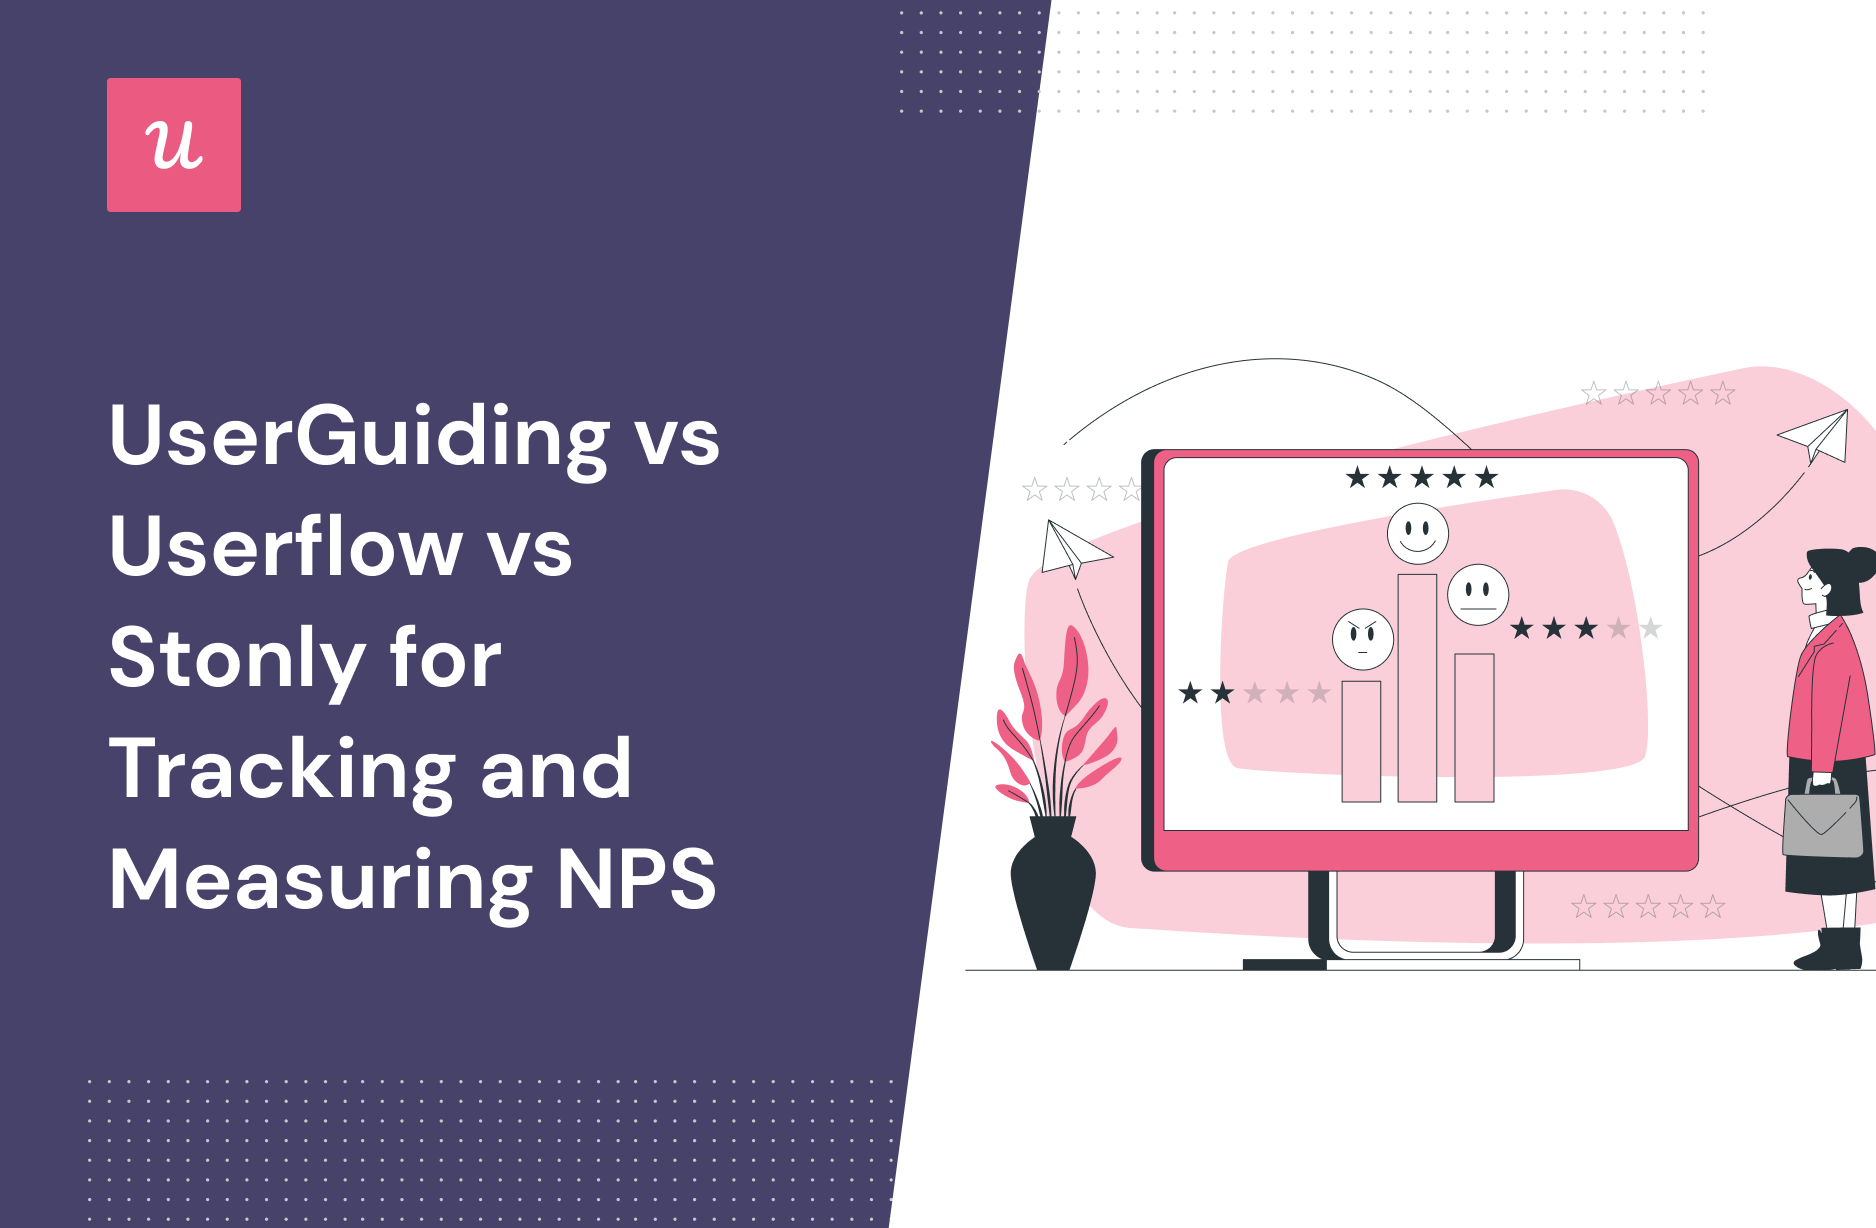 UserGuiding vs Userflow vs Stonly for Tracking and Measuring NPS